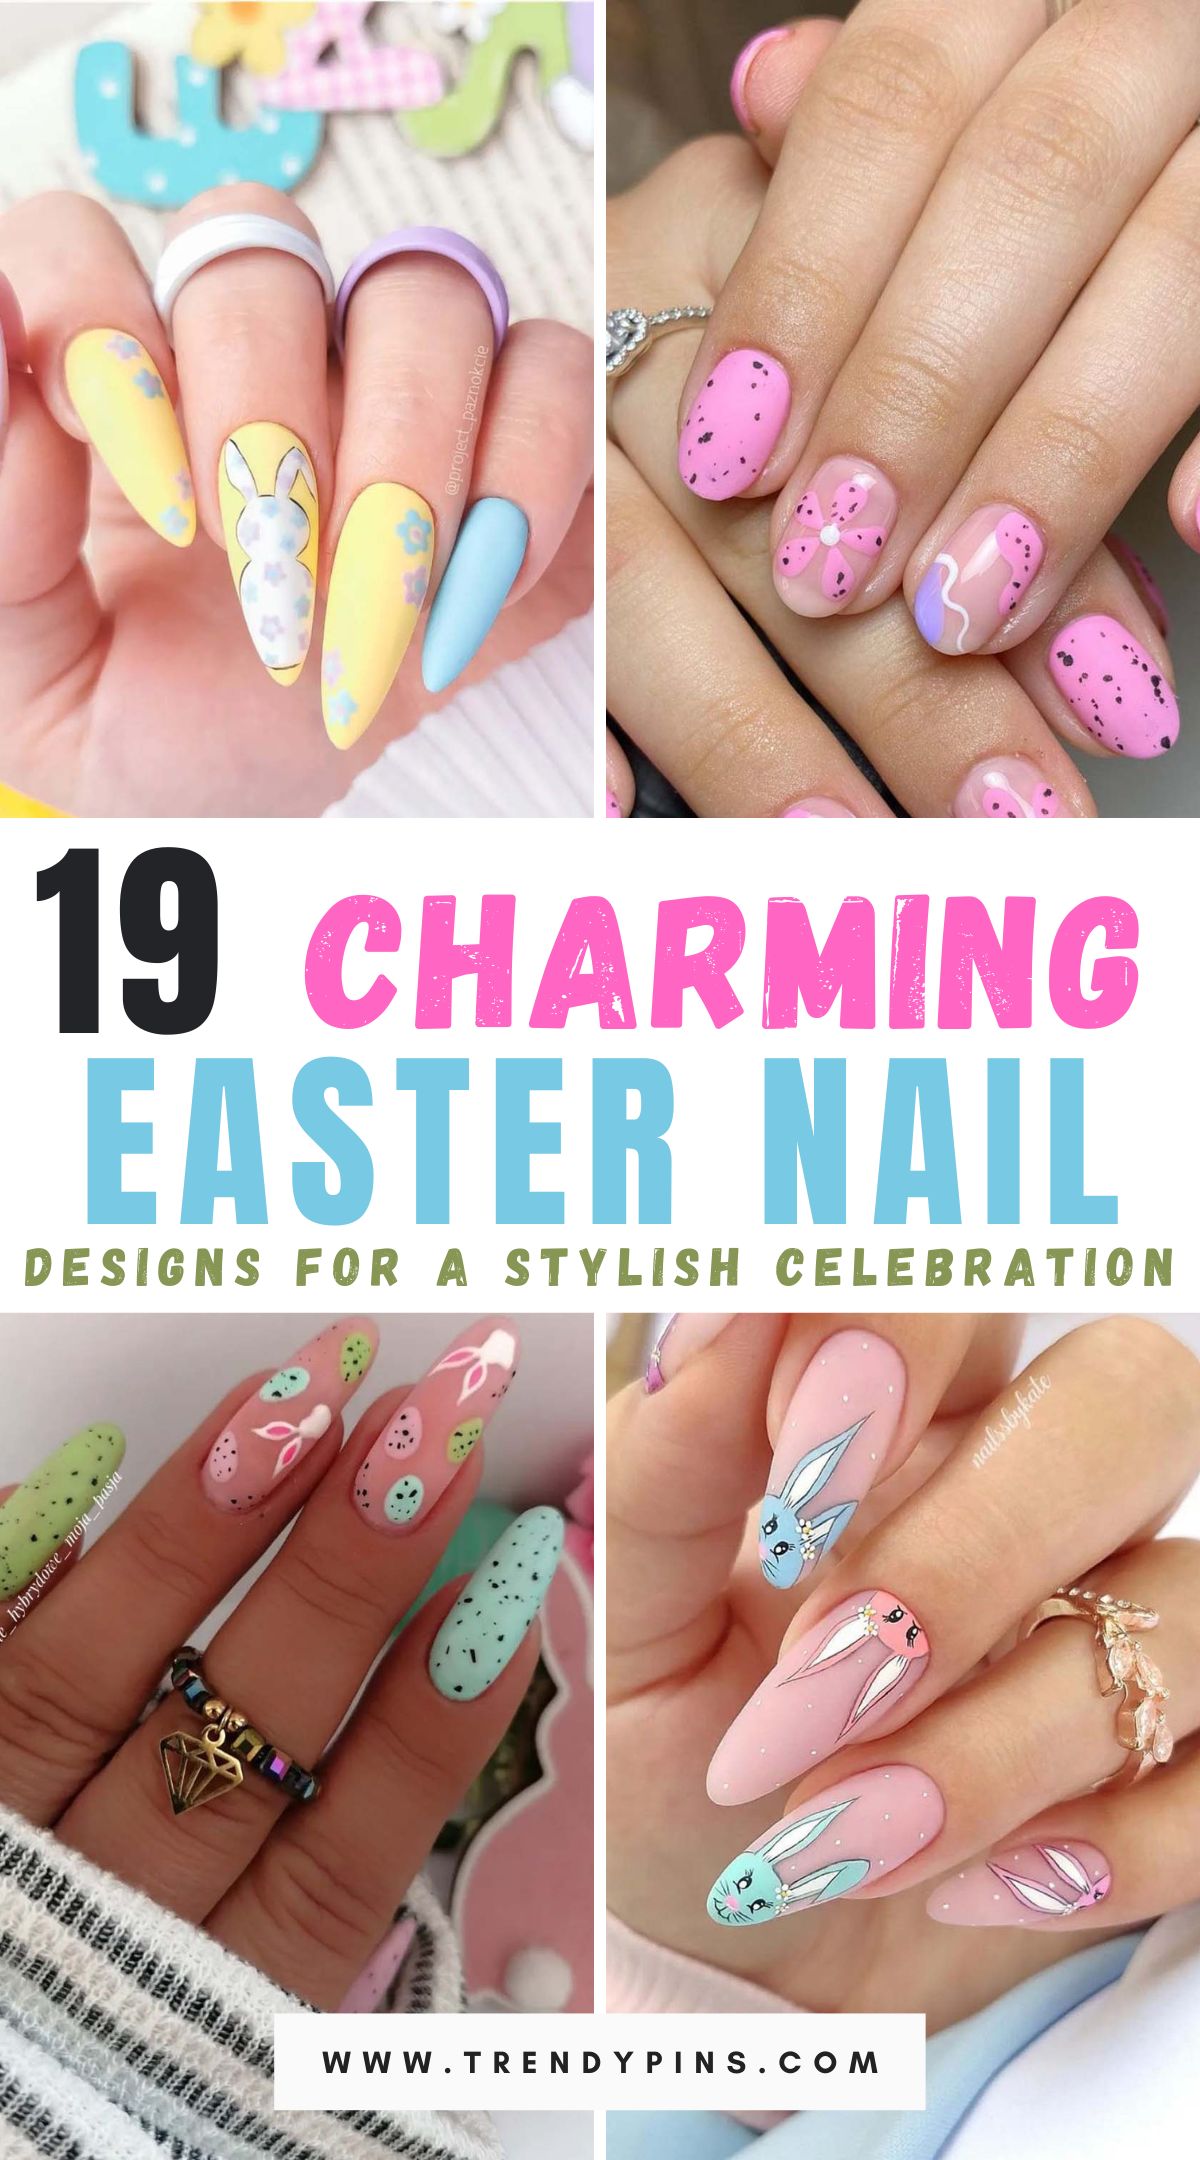 Get ready to celebrate Easter in style with these 19 charming nail designs. From pastel hues to adorable bunny motifs, explore creative and festive ideas to adorn your nails for a delightful Easter celebration.